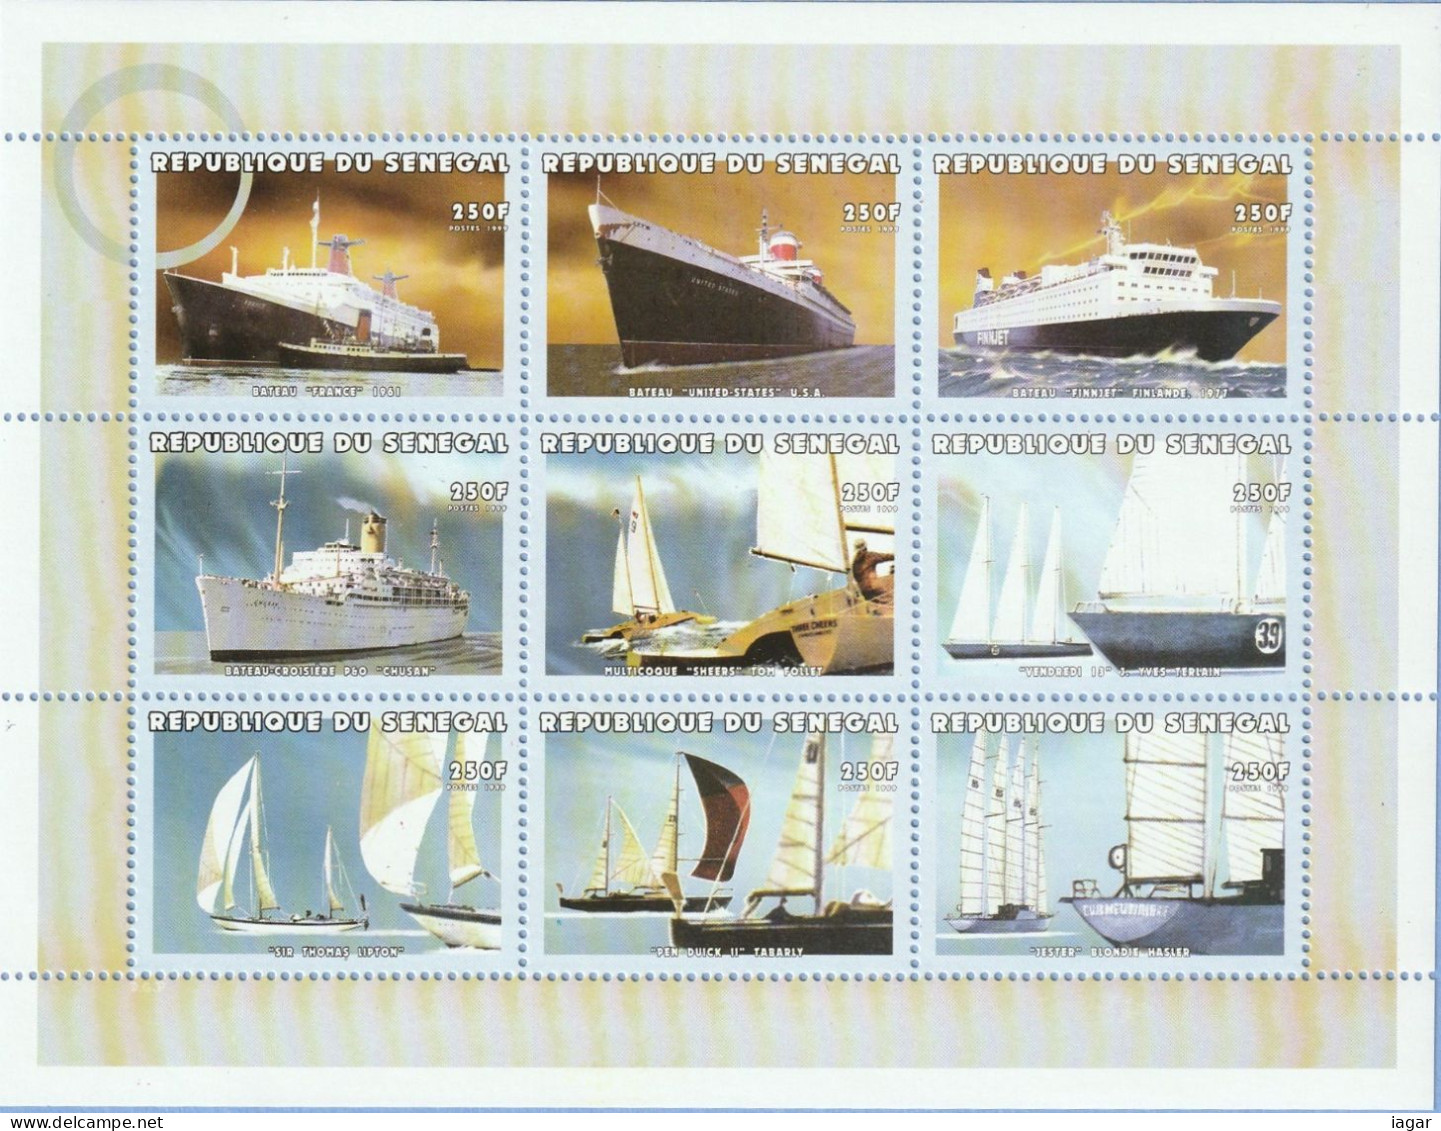 THEMATIC TRANSPORT: HISTORIC SHIPS AND FAMOUS SAILING SHIPS. LE"FRANCE", "UNITED STATES", "PEN DUICK II"  Etc  - SENEGAL - Andere(Zee)